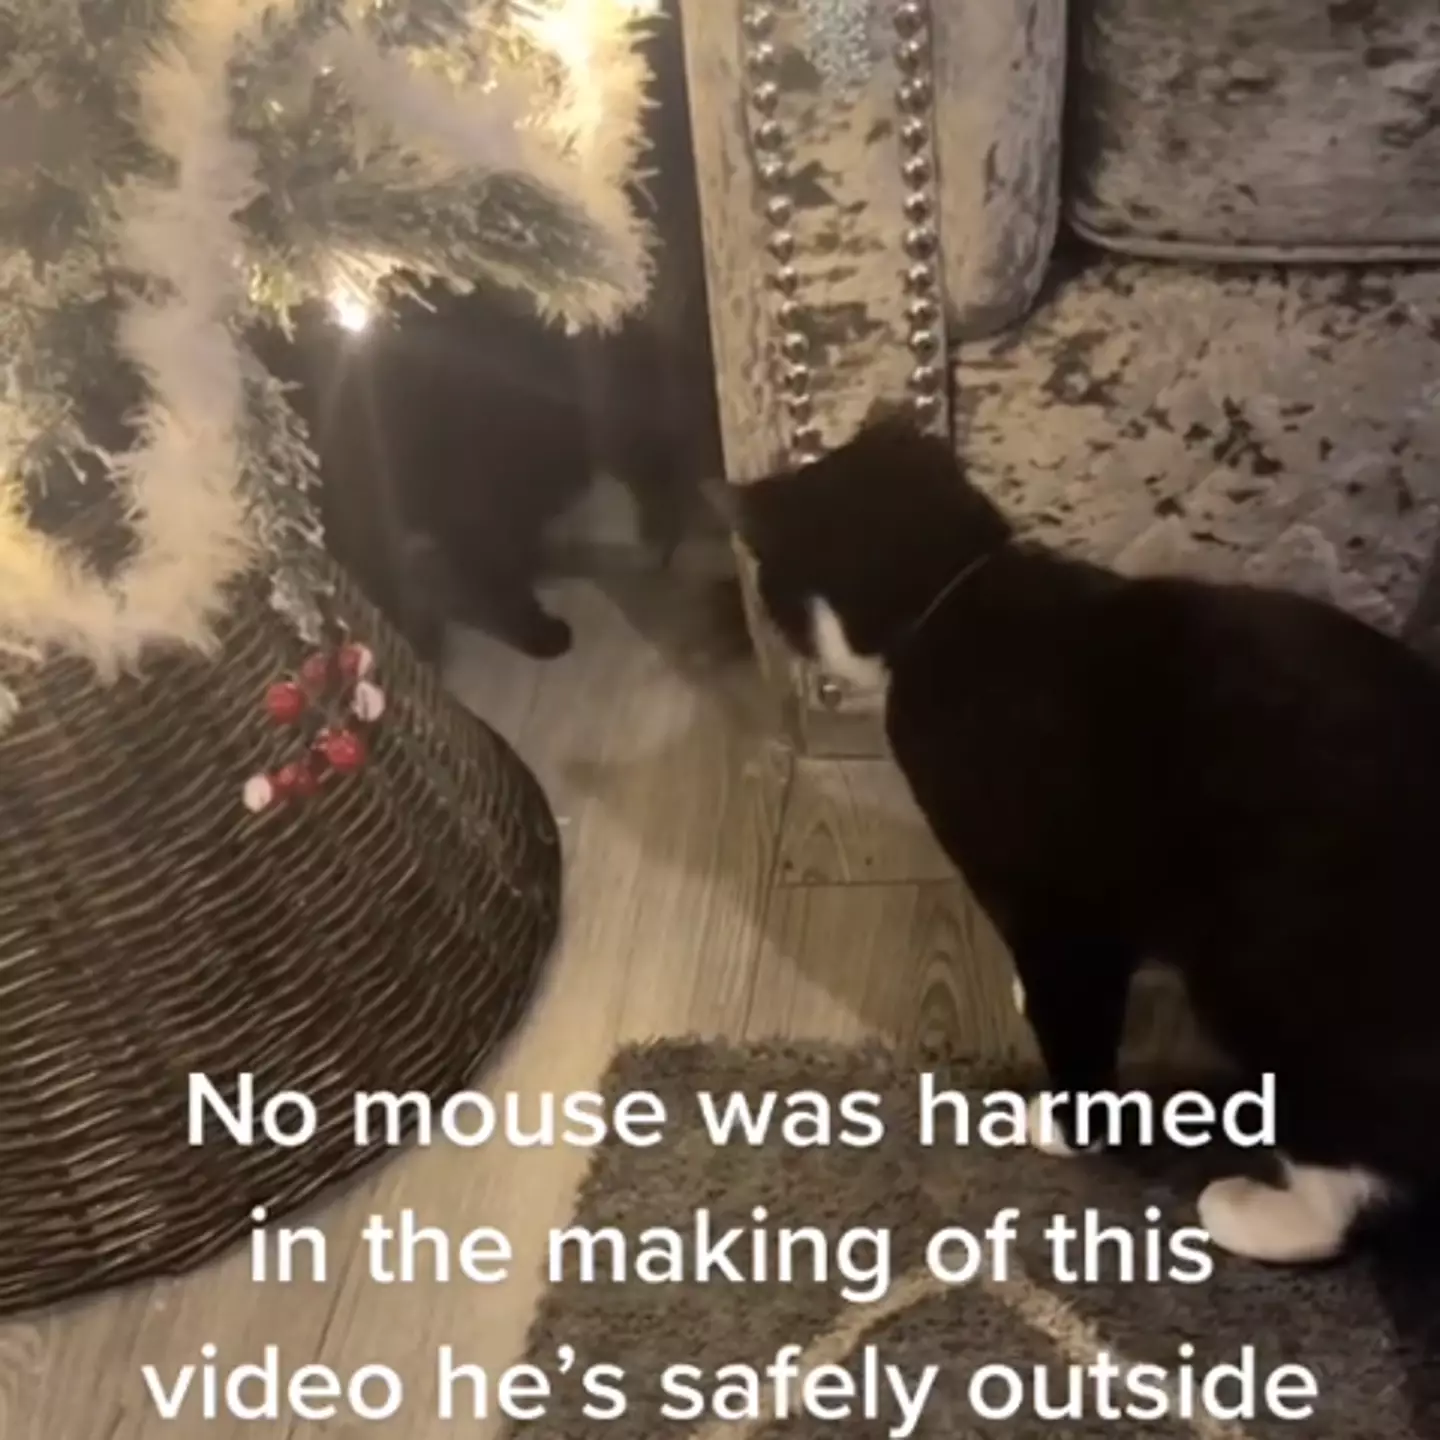 The woman's cats were chasing the mouse in a second video.